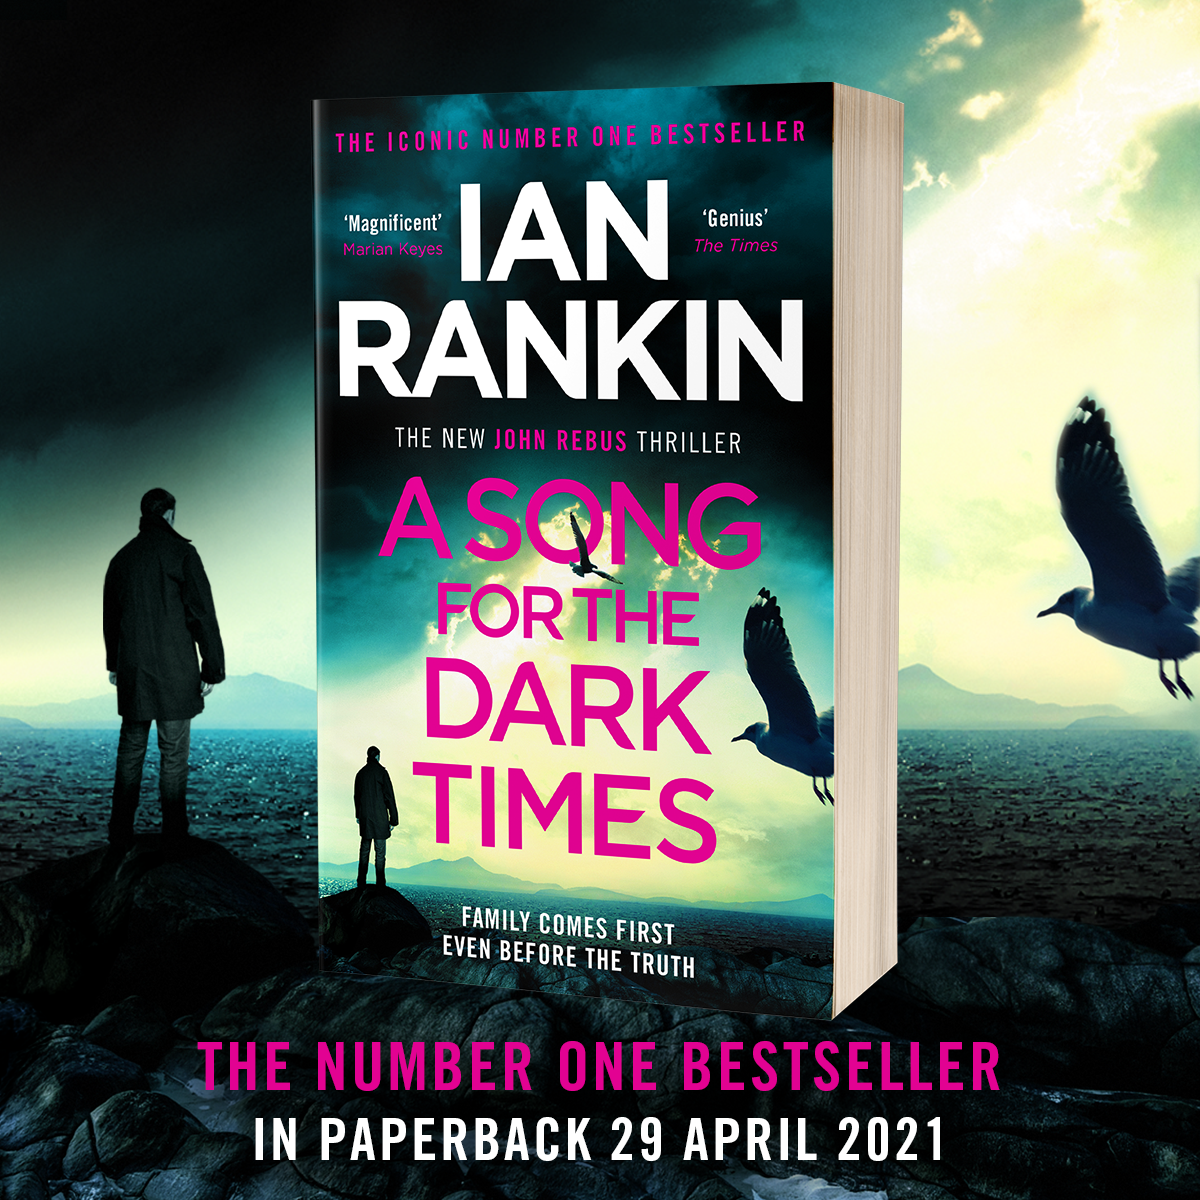 A SONG FOR THE DARK TIMES the latest Rebus thriller from Ian Rankin